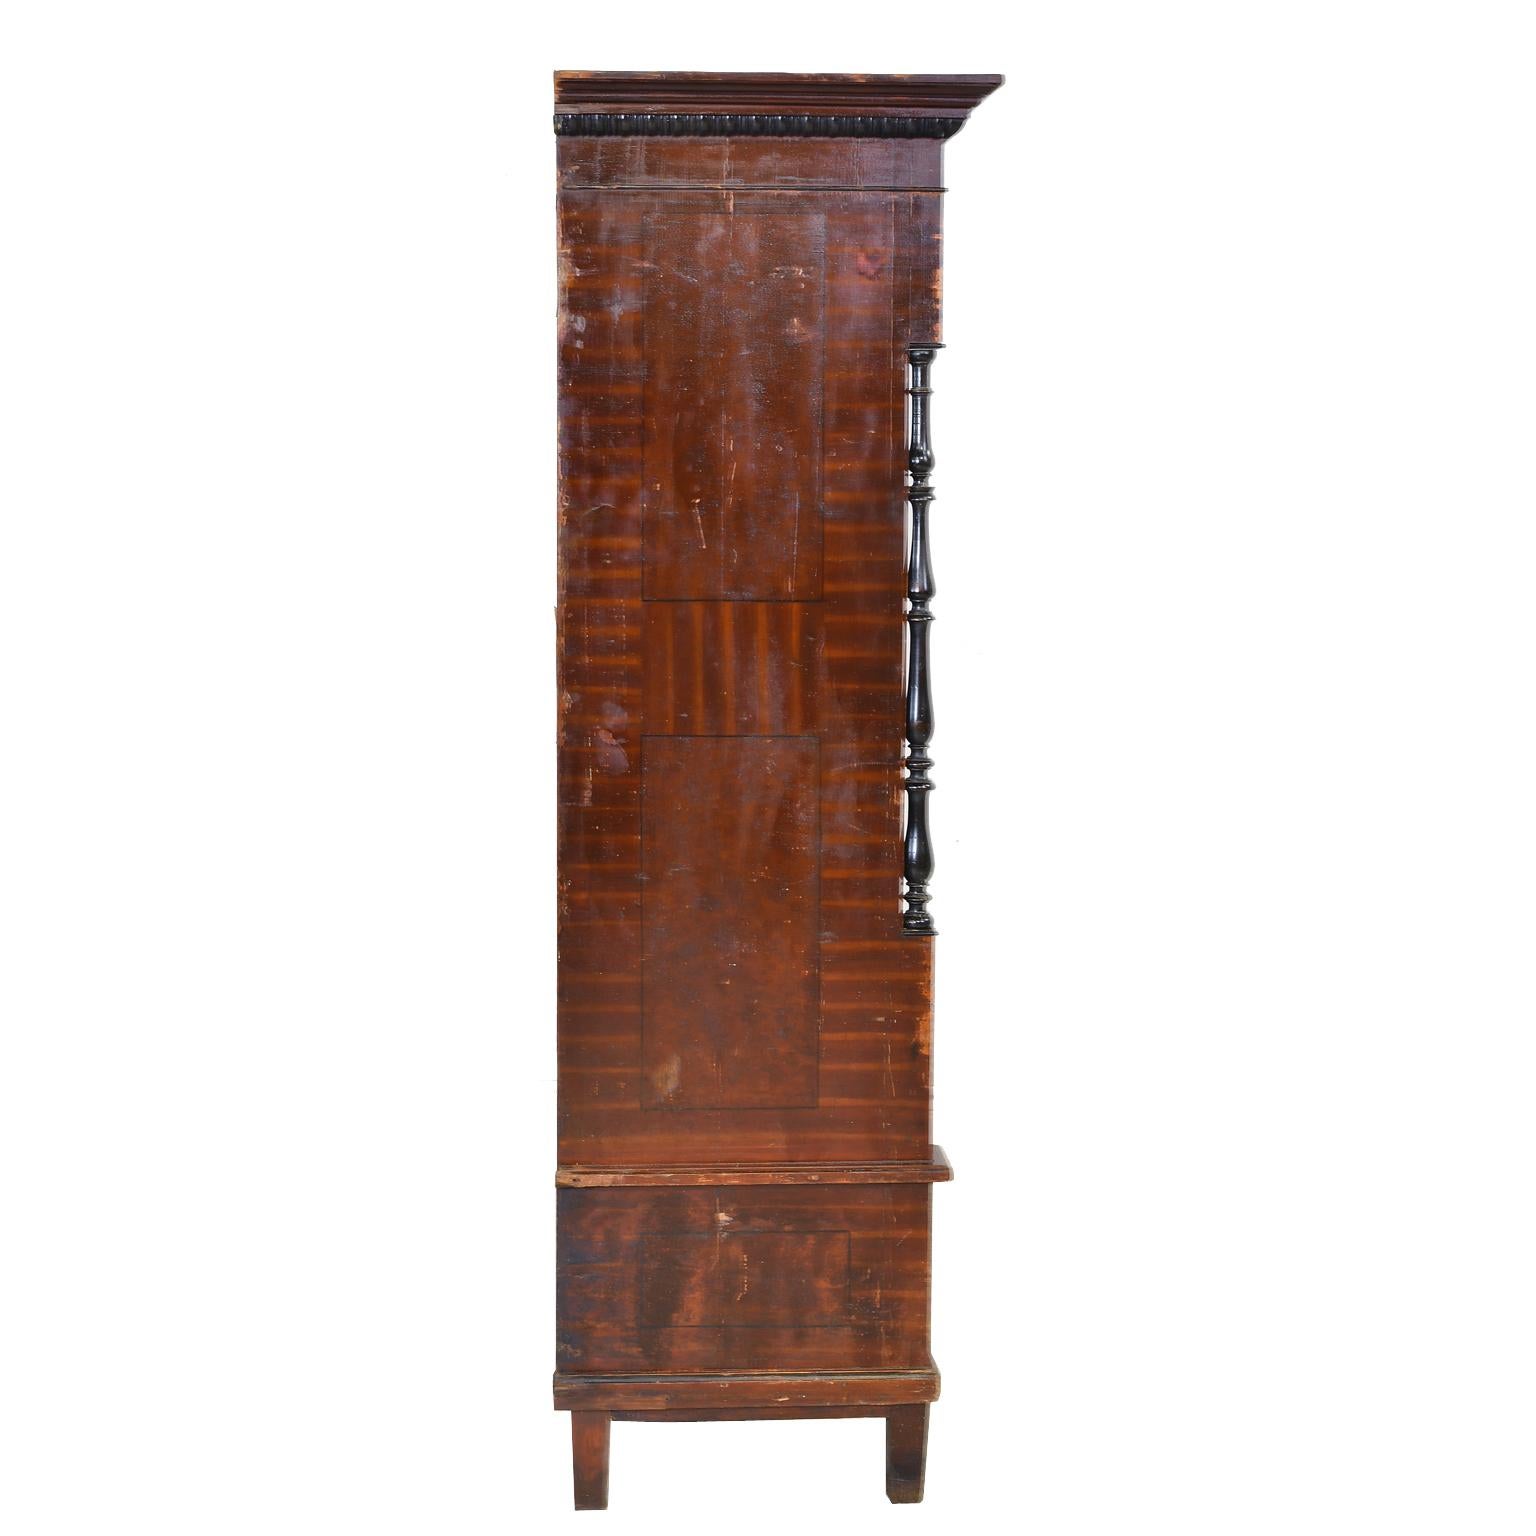 Pine Austrian Armoire with Original Tooled Red/Maroon Painted Finish, circa 1800